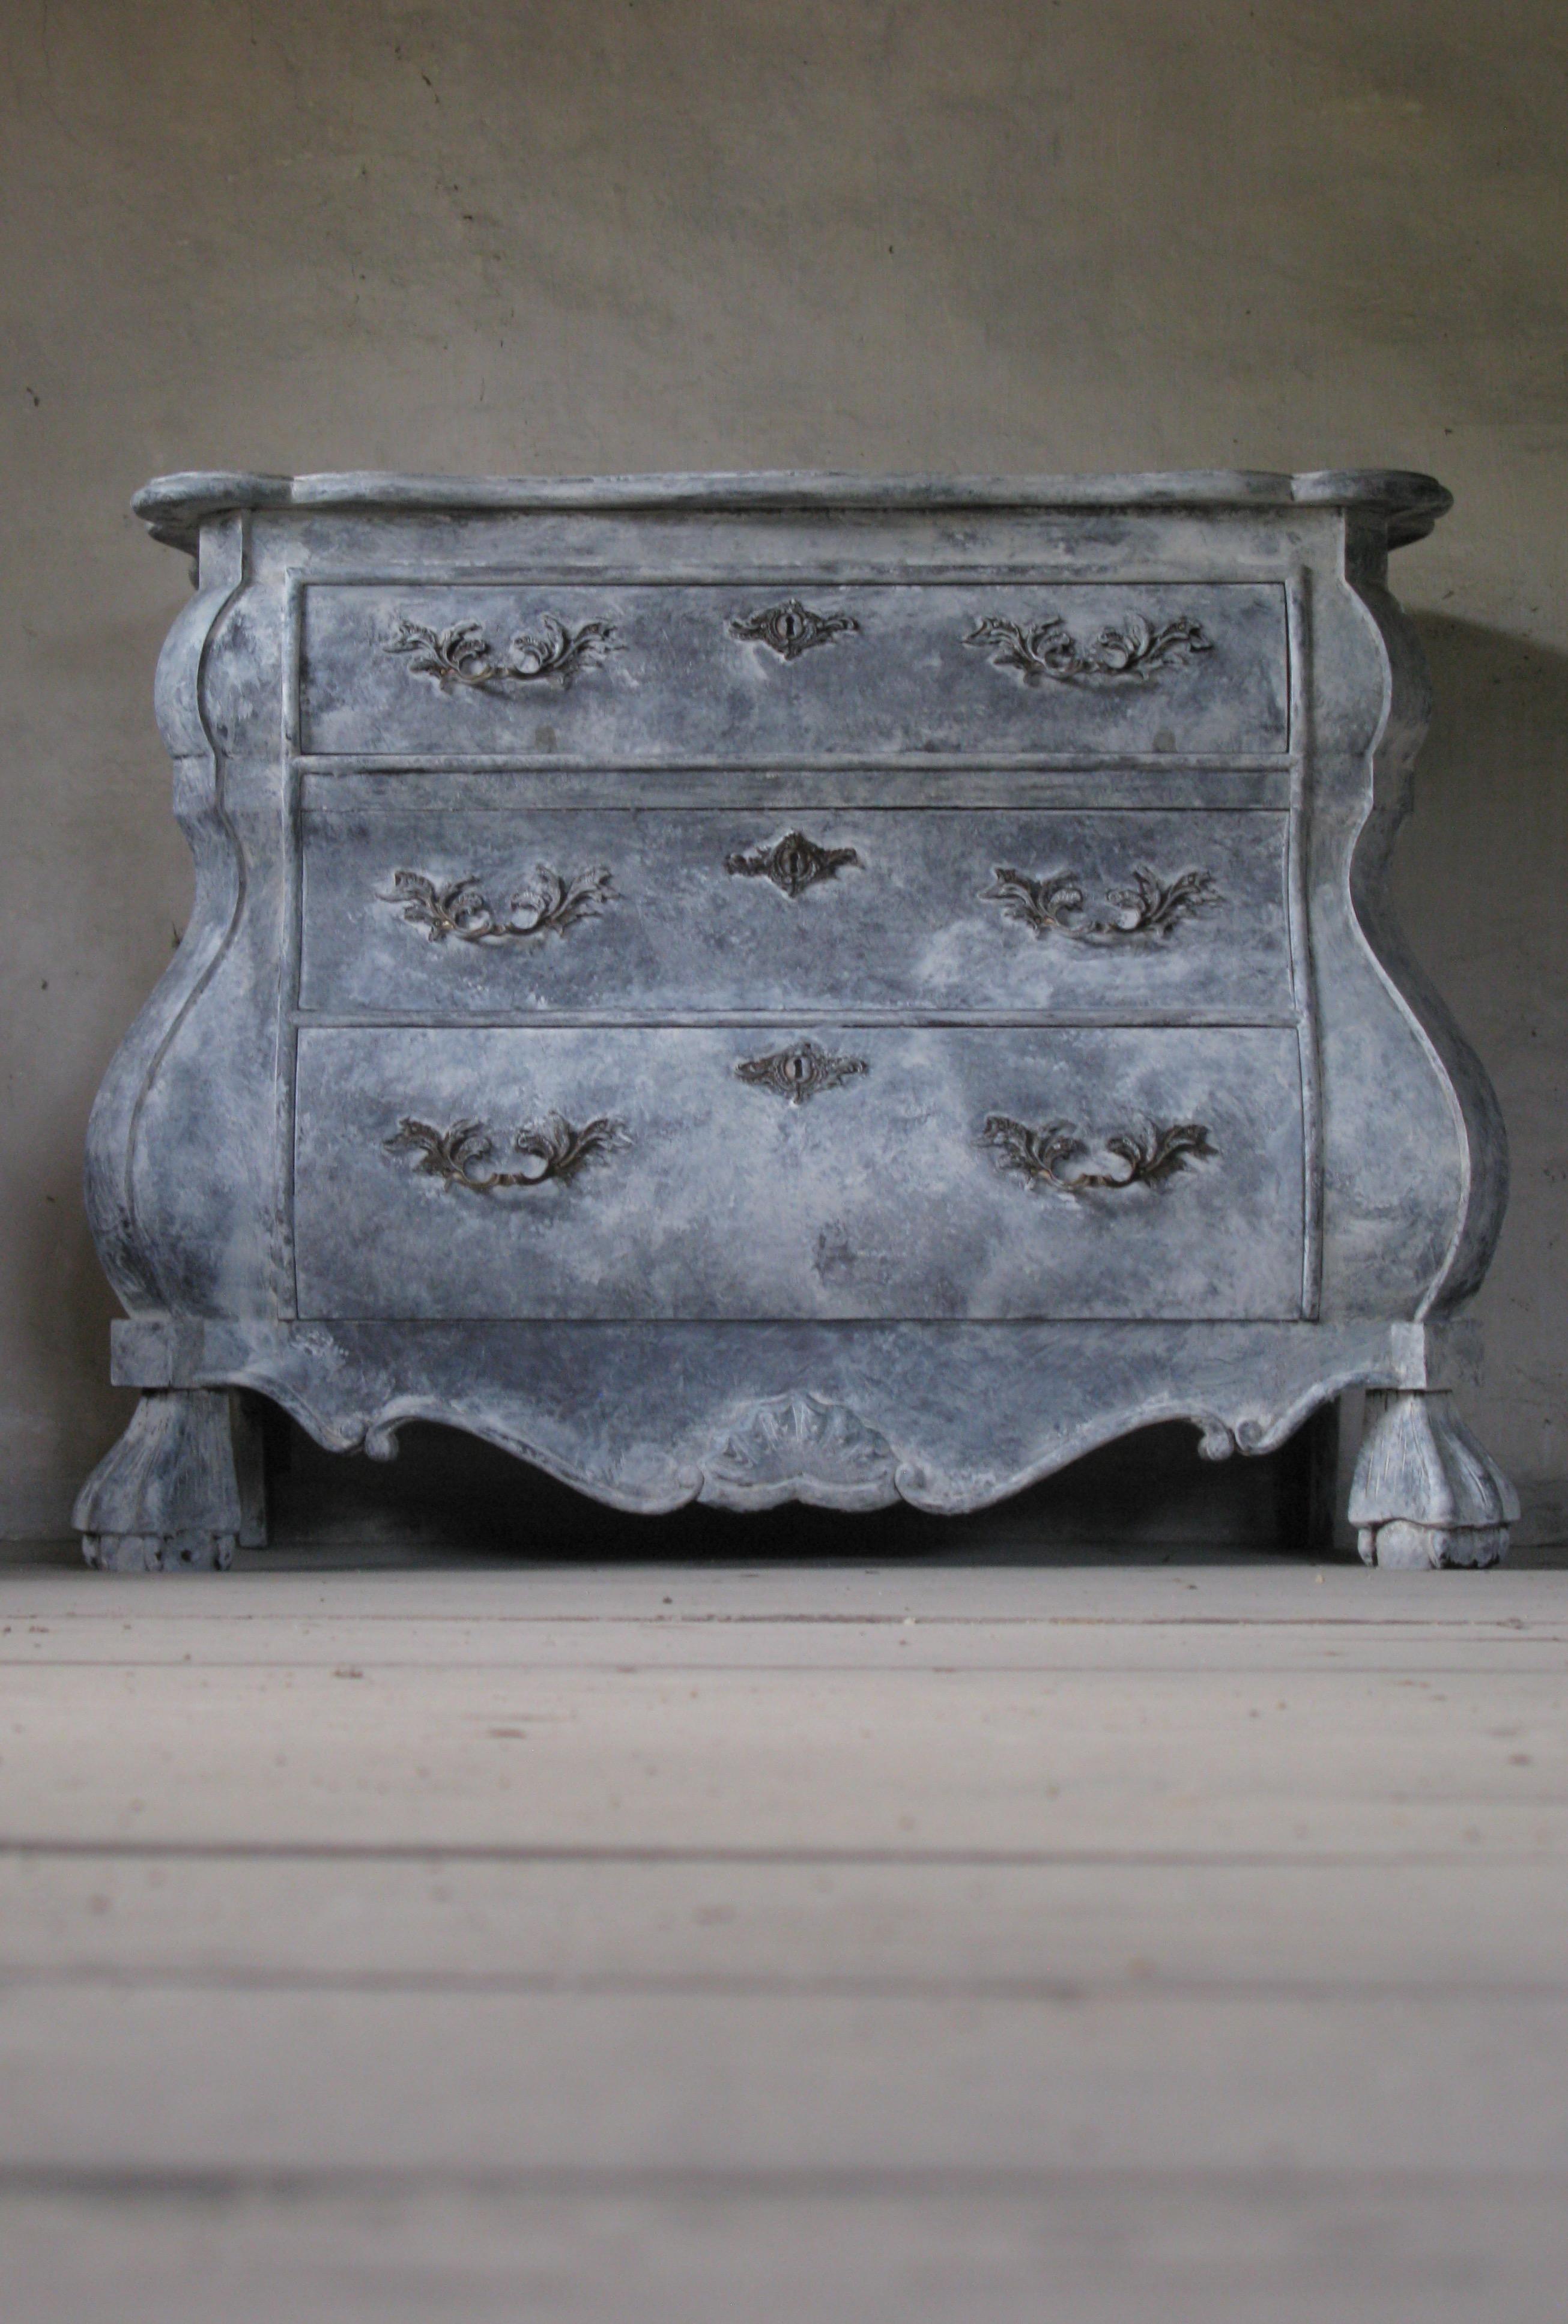 A Baroque style Dutch painted wood bombé three-drawer commode from my home country

This commode was born in the Netherlands and features a shaped top with beveled edges over three drawers, the upper one being smaller than the lower two. These